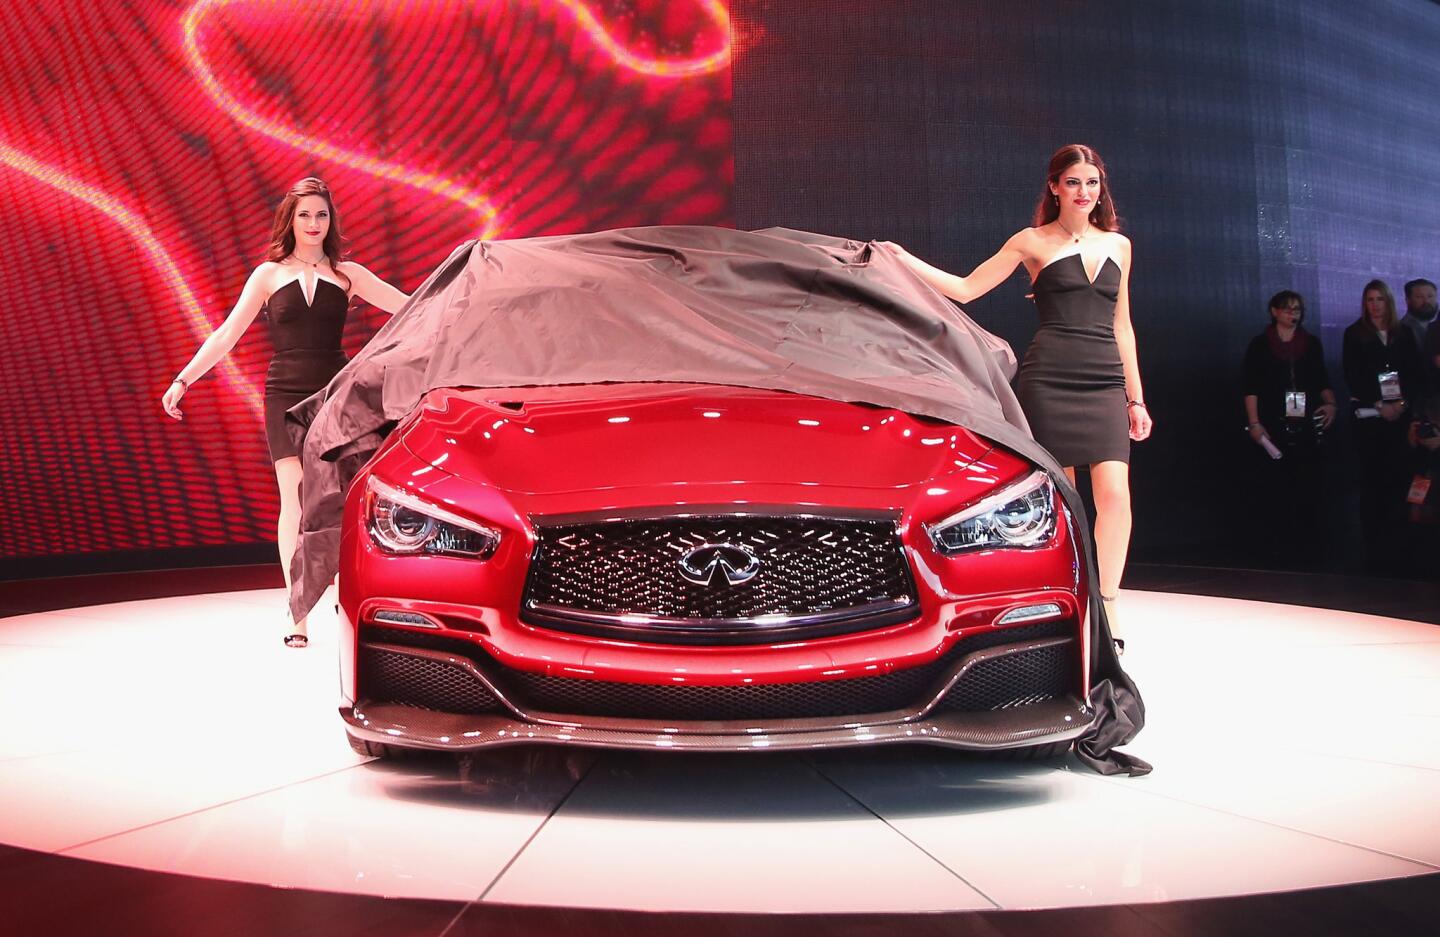 Infinity introduces the Q50 Eau Rouge concept car at the North American International Auto Show in Detroit.